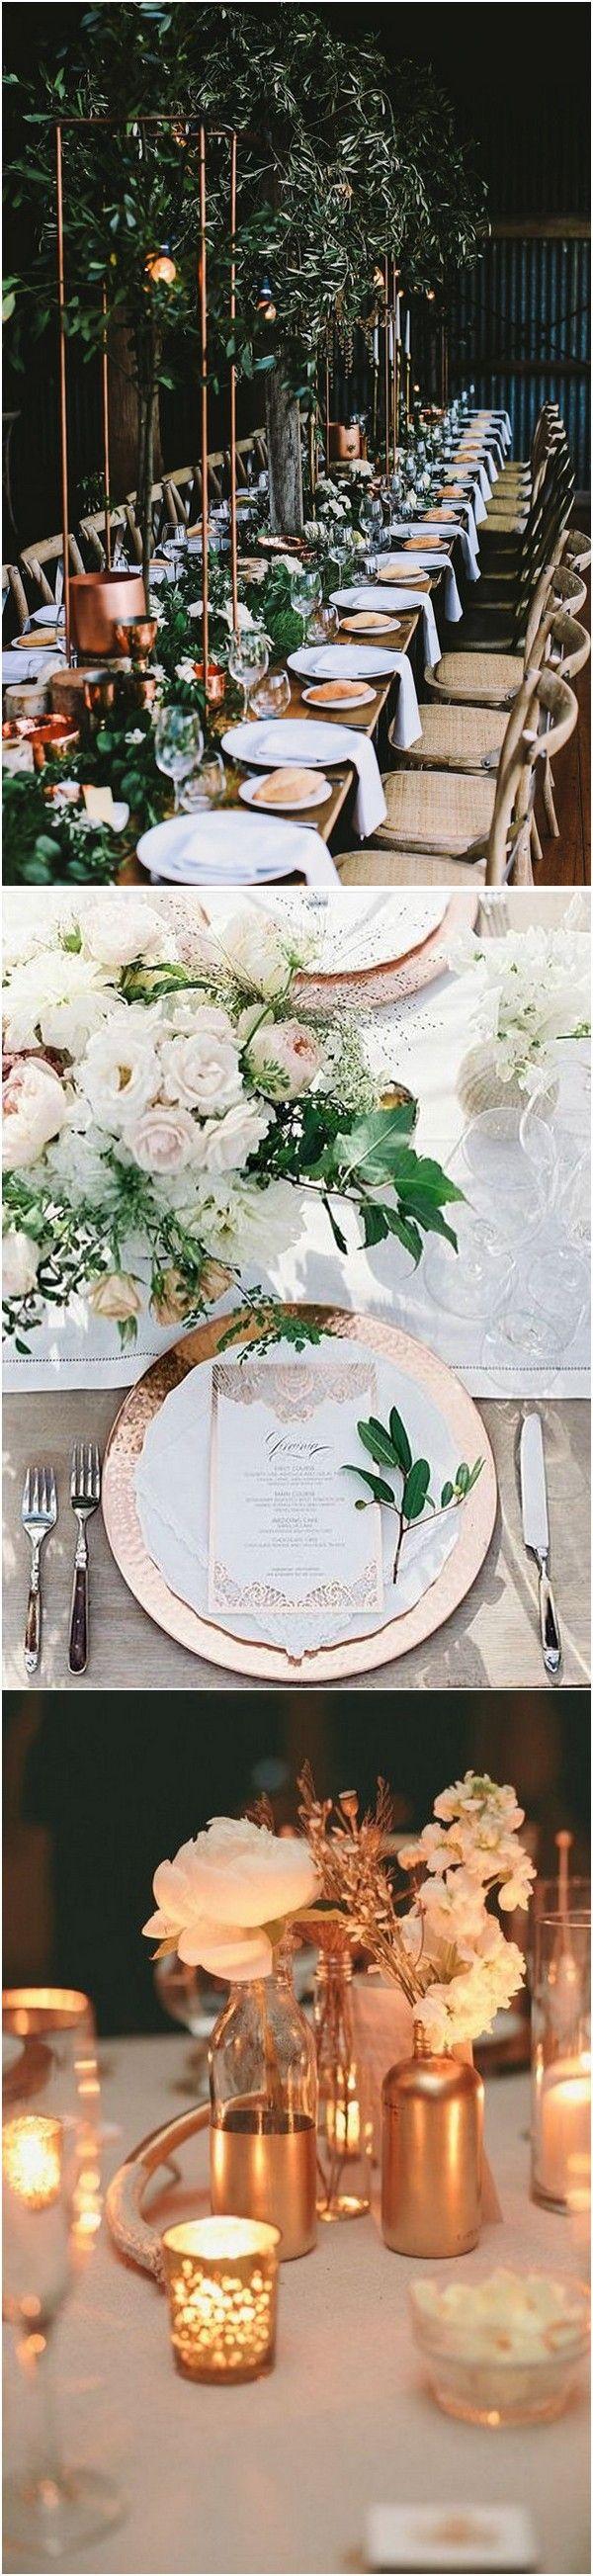 Wedding - Trending-20 Metallic Bronze And Copper Wedding Color Ideas - Page 3 Of 3